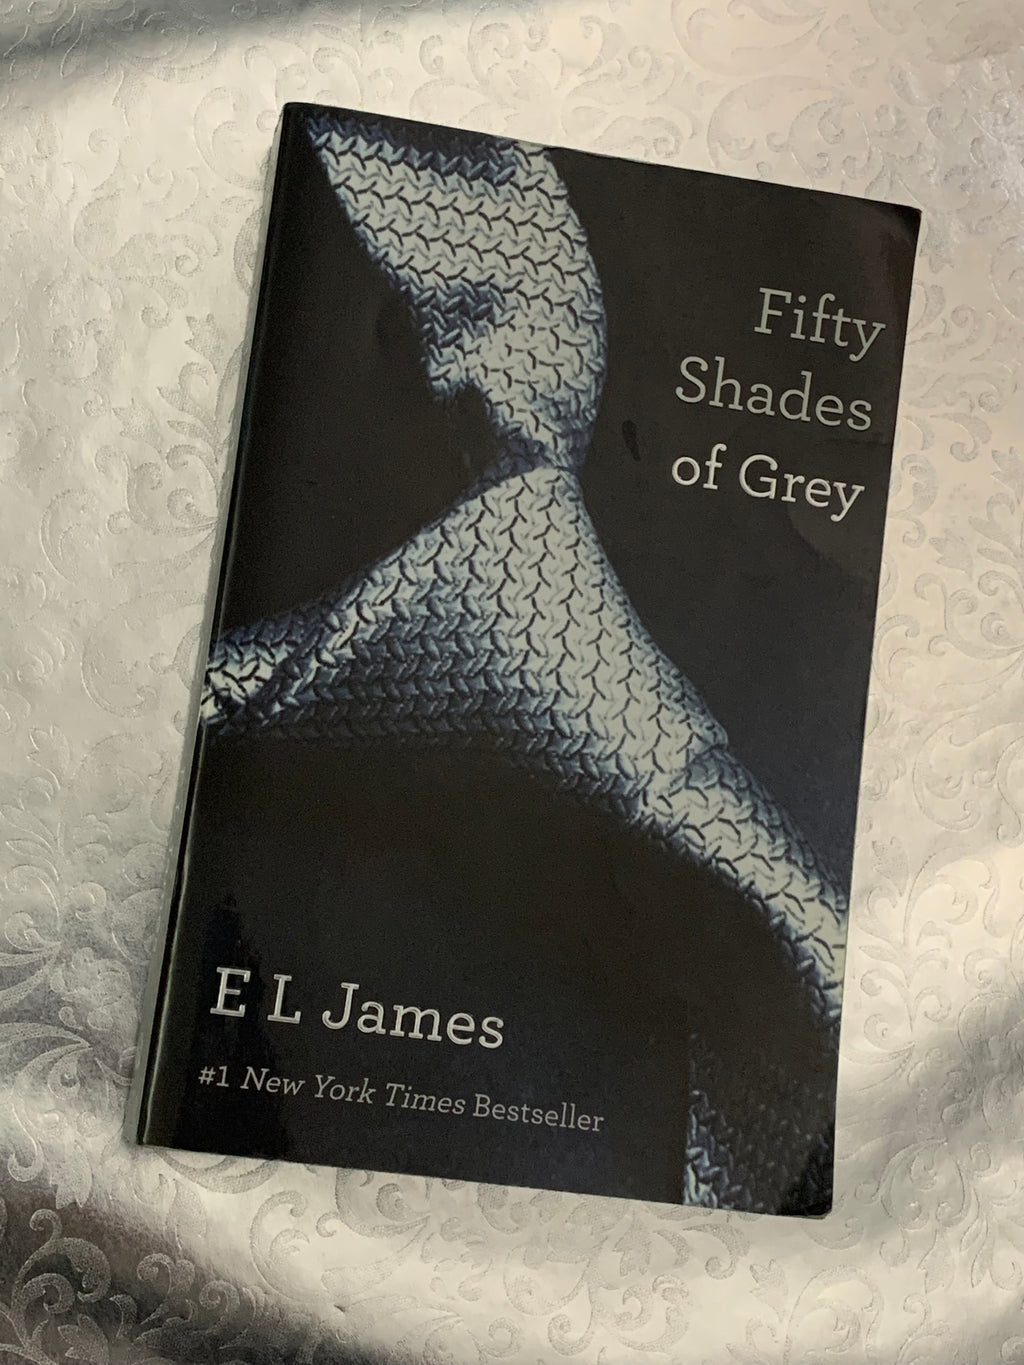 Fifty Shades of Grey- By E.L. James